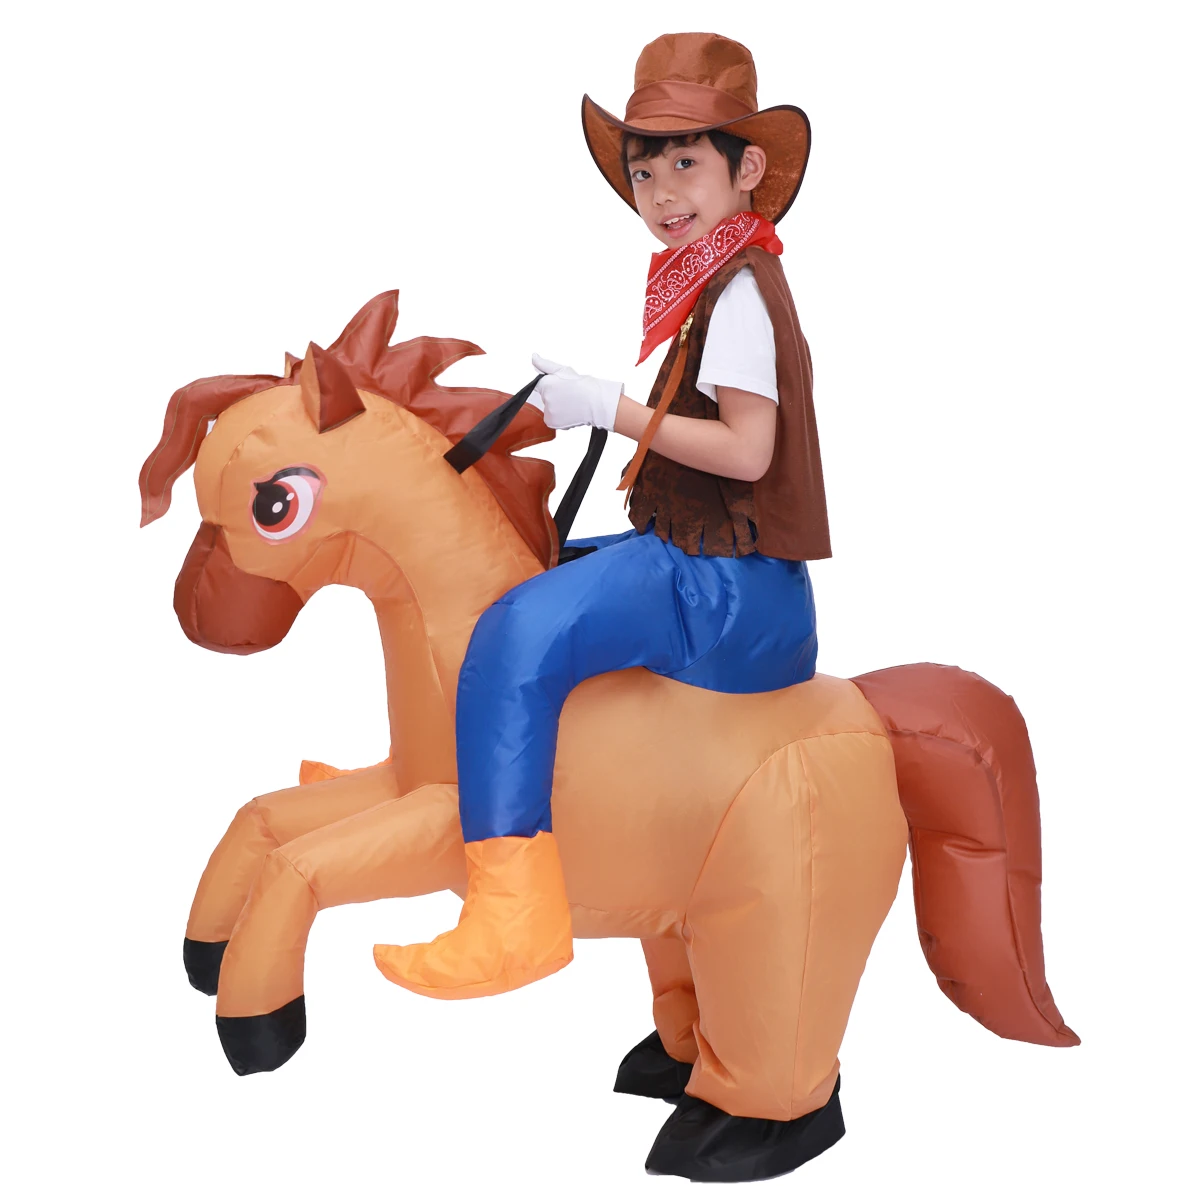 Kids Child Inflatable Horse Costume Cosplay Girls Boys Cowboy Ride Horse Funny Halloween Purim Party Inflated Garment Disfraces umorden child kids witch costume girls halloween purim carnival party mardi gras fantasia fancy dress cosplay